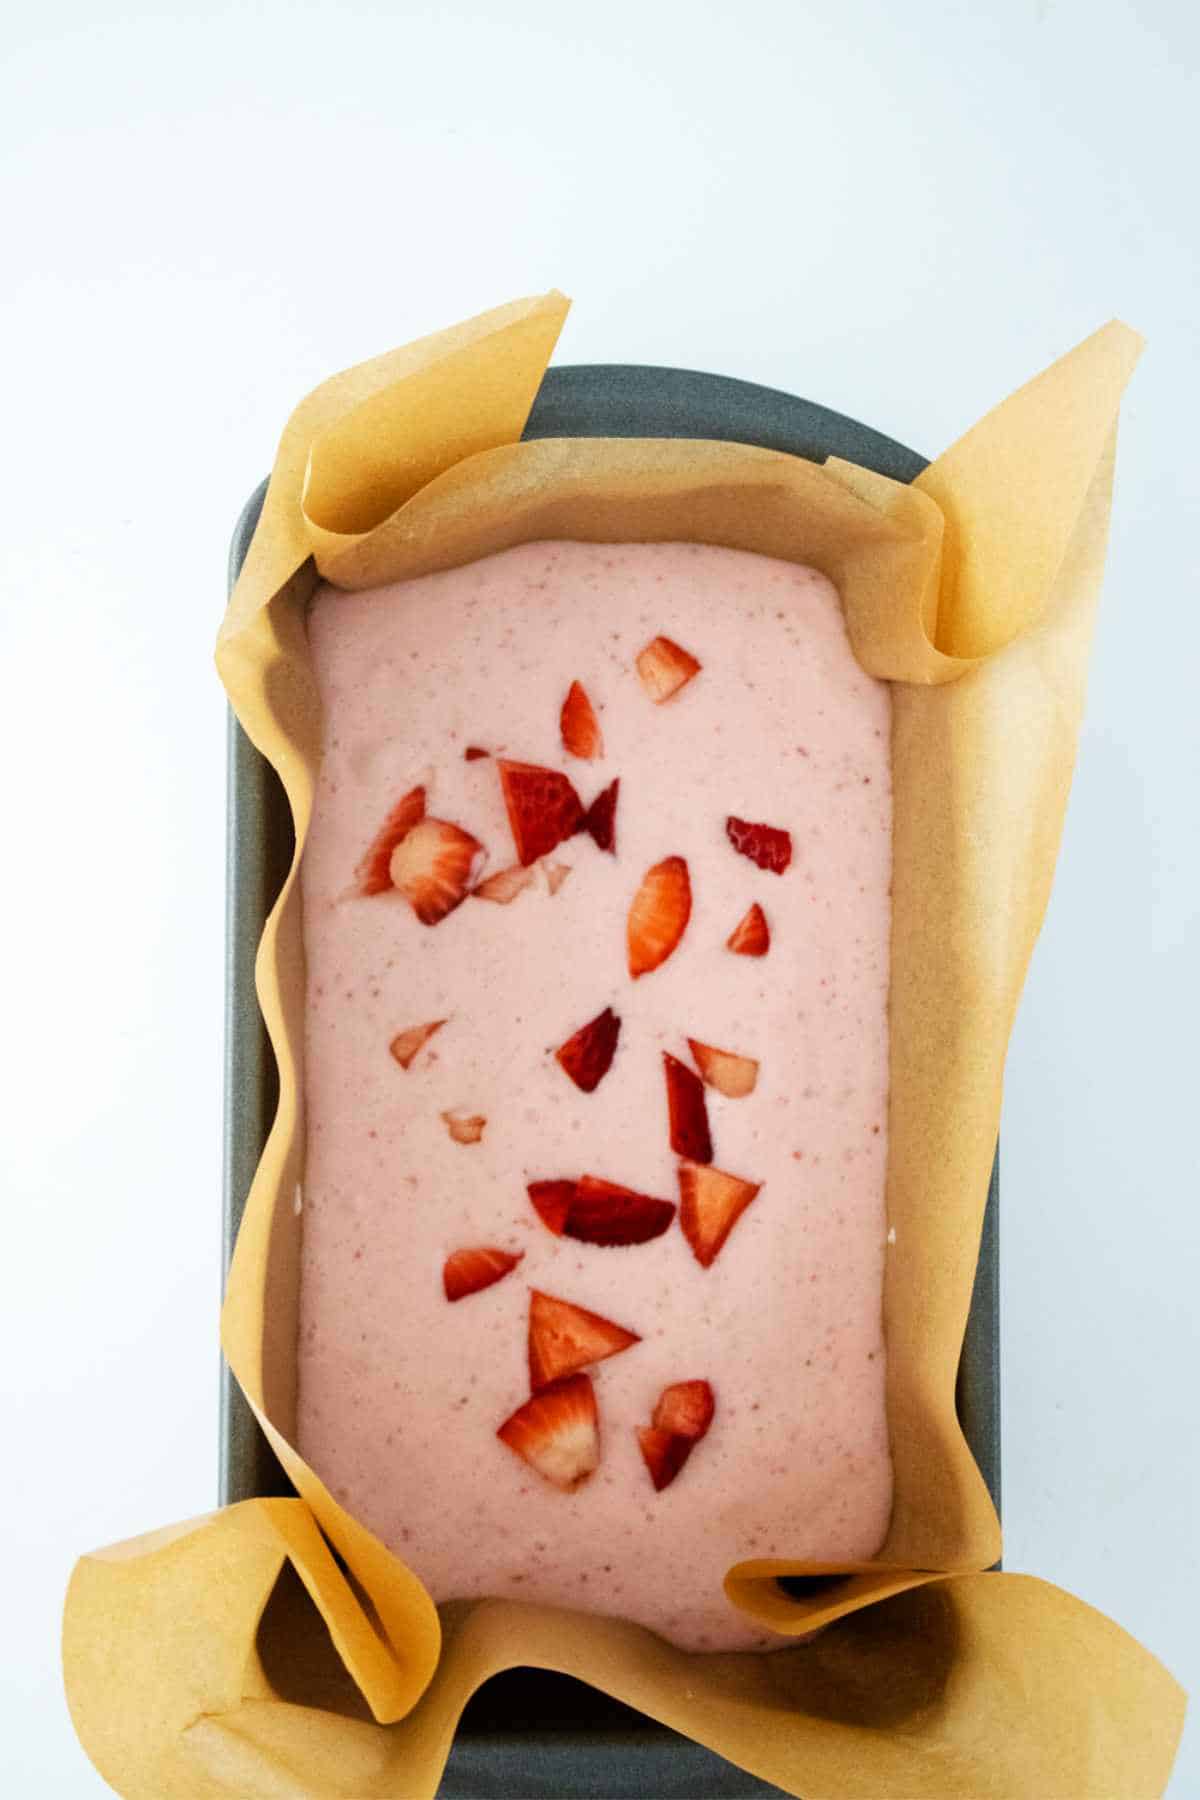 ice cream with cut strawberries on top in a loaf pan.